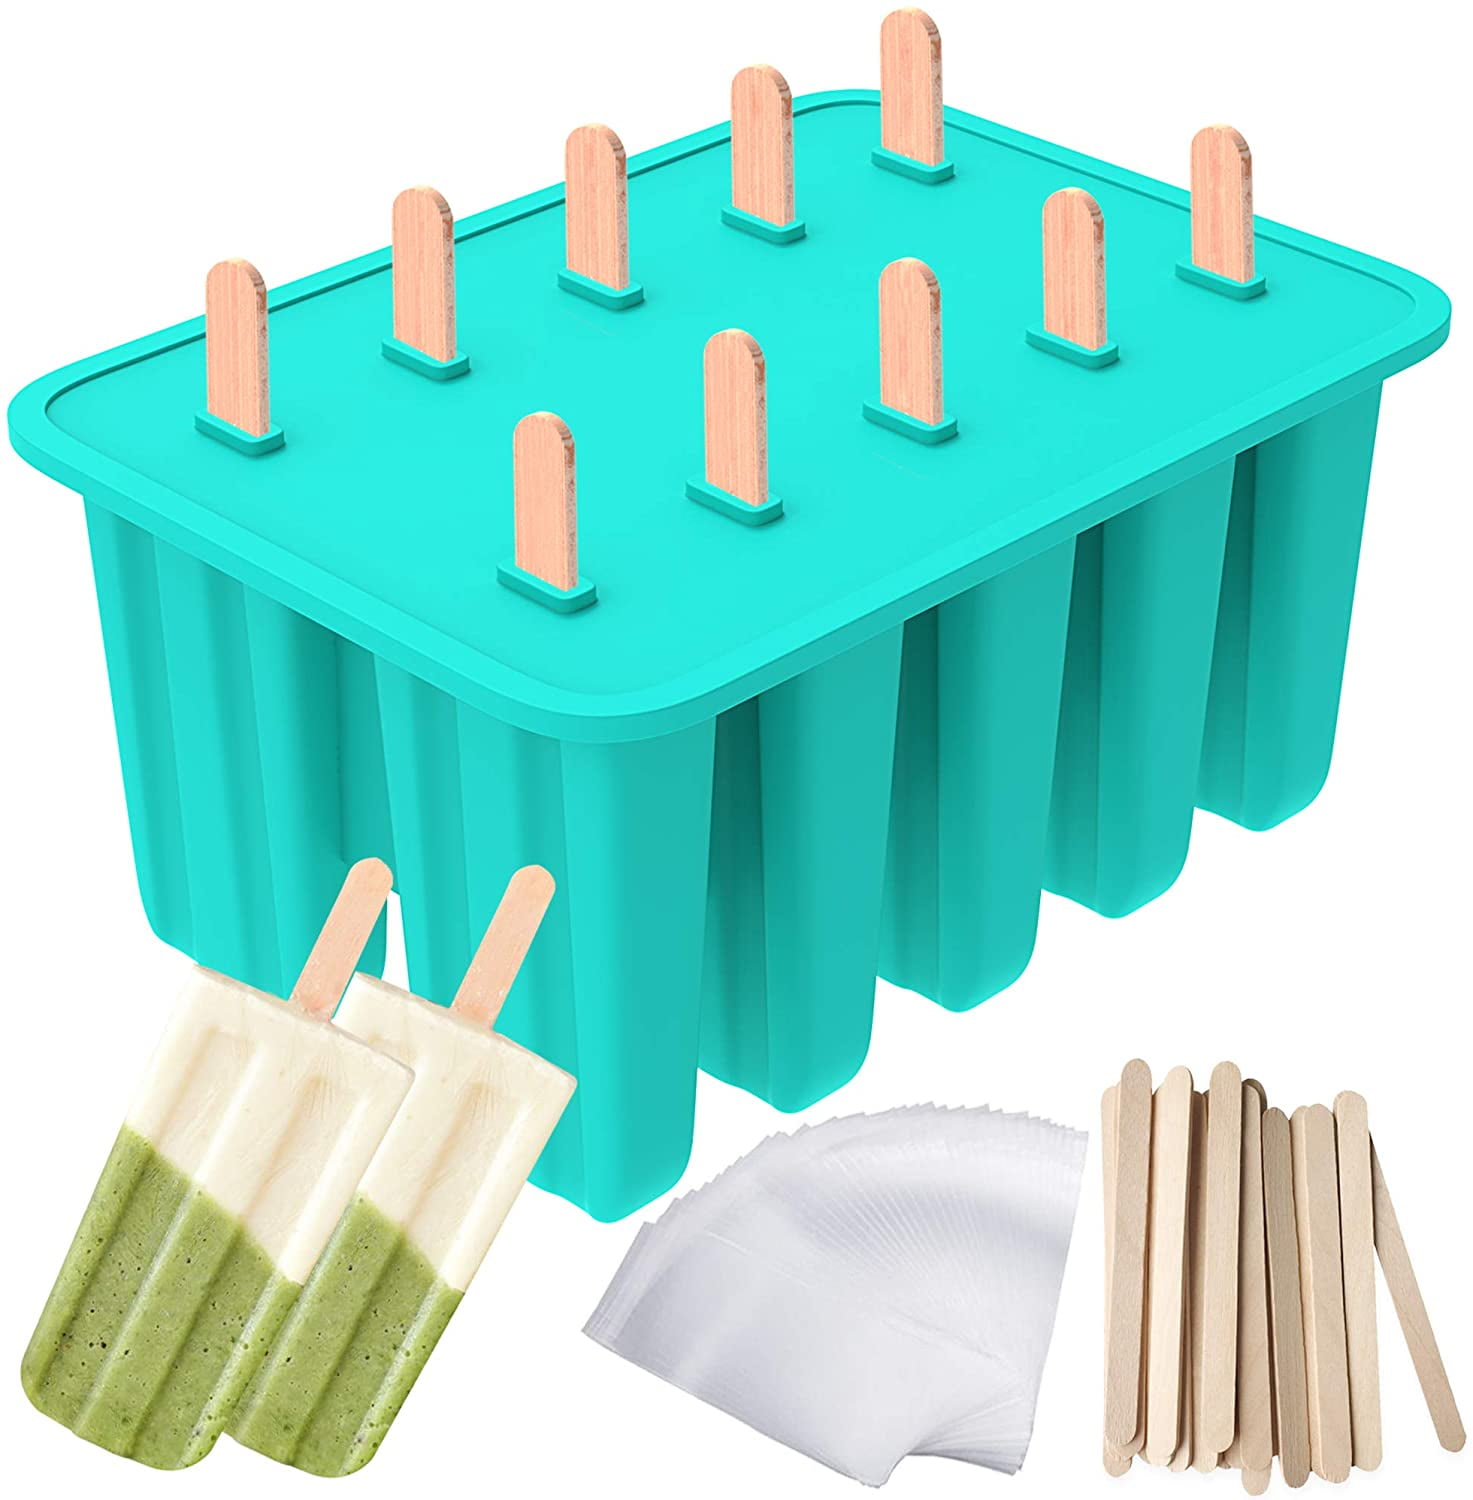 Easy Release Ice Pop Maker for Kids with Cleaning Brush and Funnel Reusable Silicone Popsicle Molds Ozera 12 Cavities Popsicle Molds 